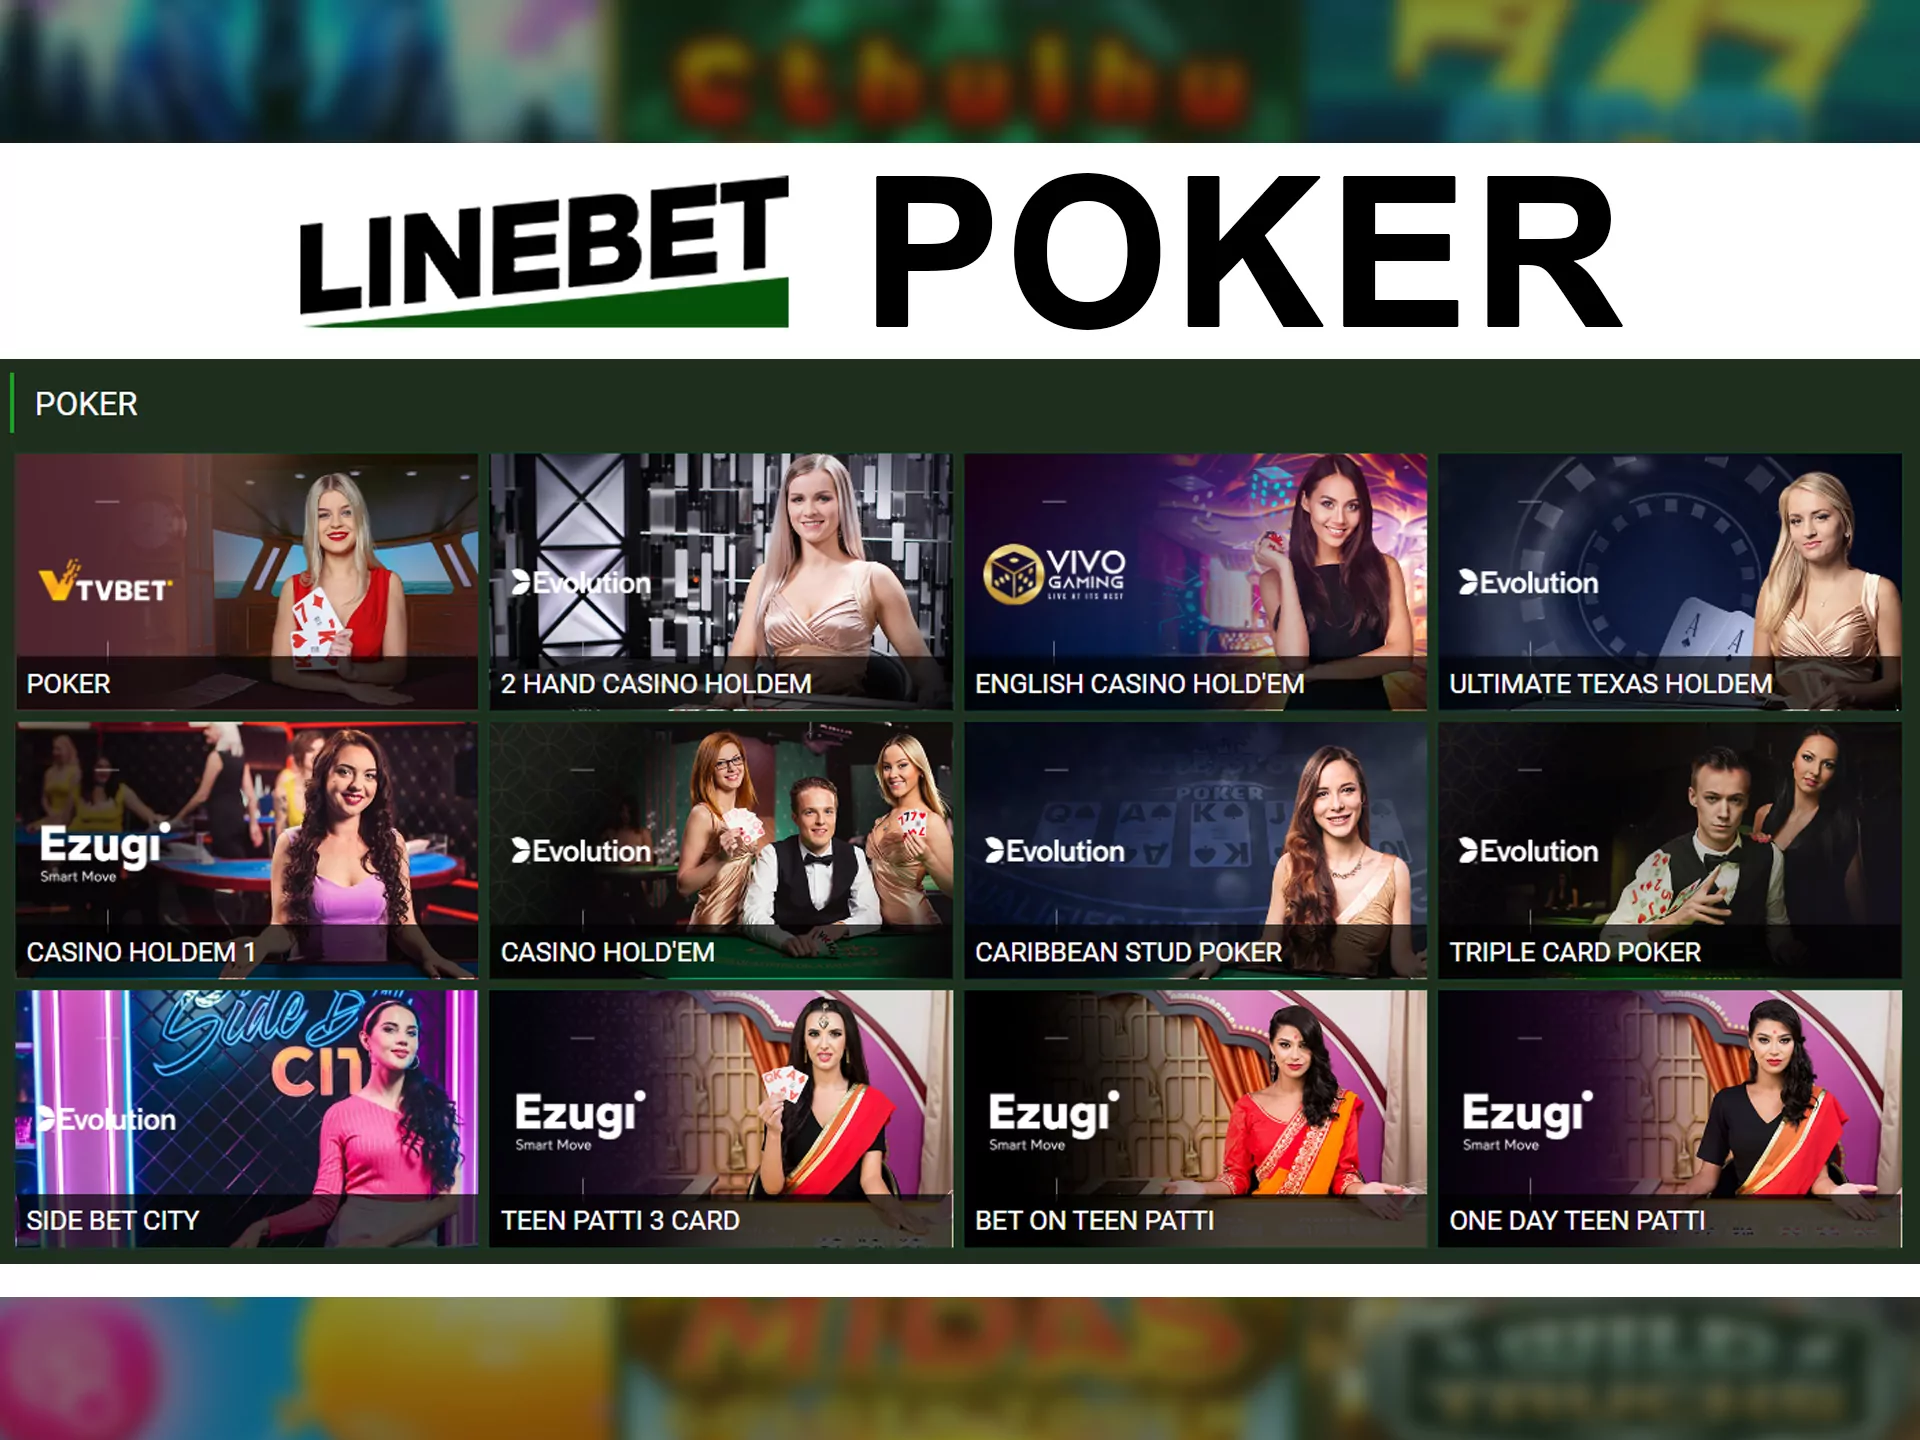 Choose prefered poker table and play on it at Linebet.